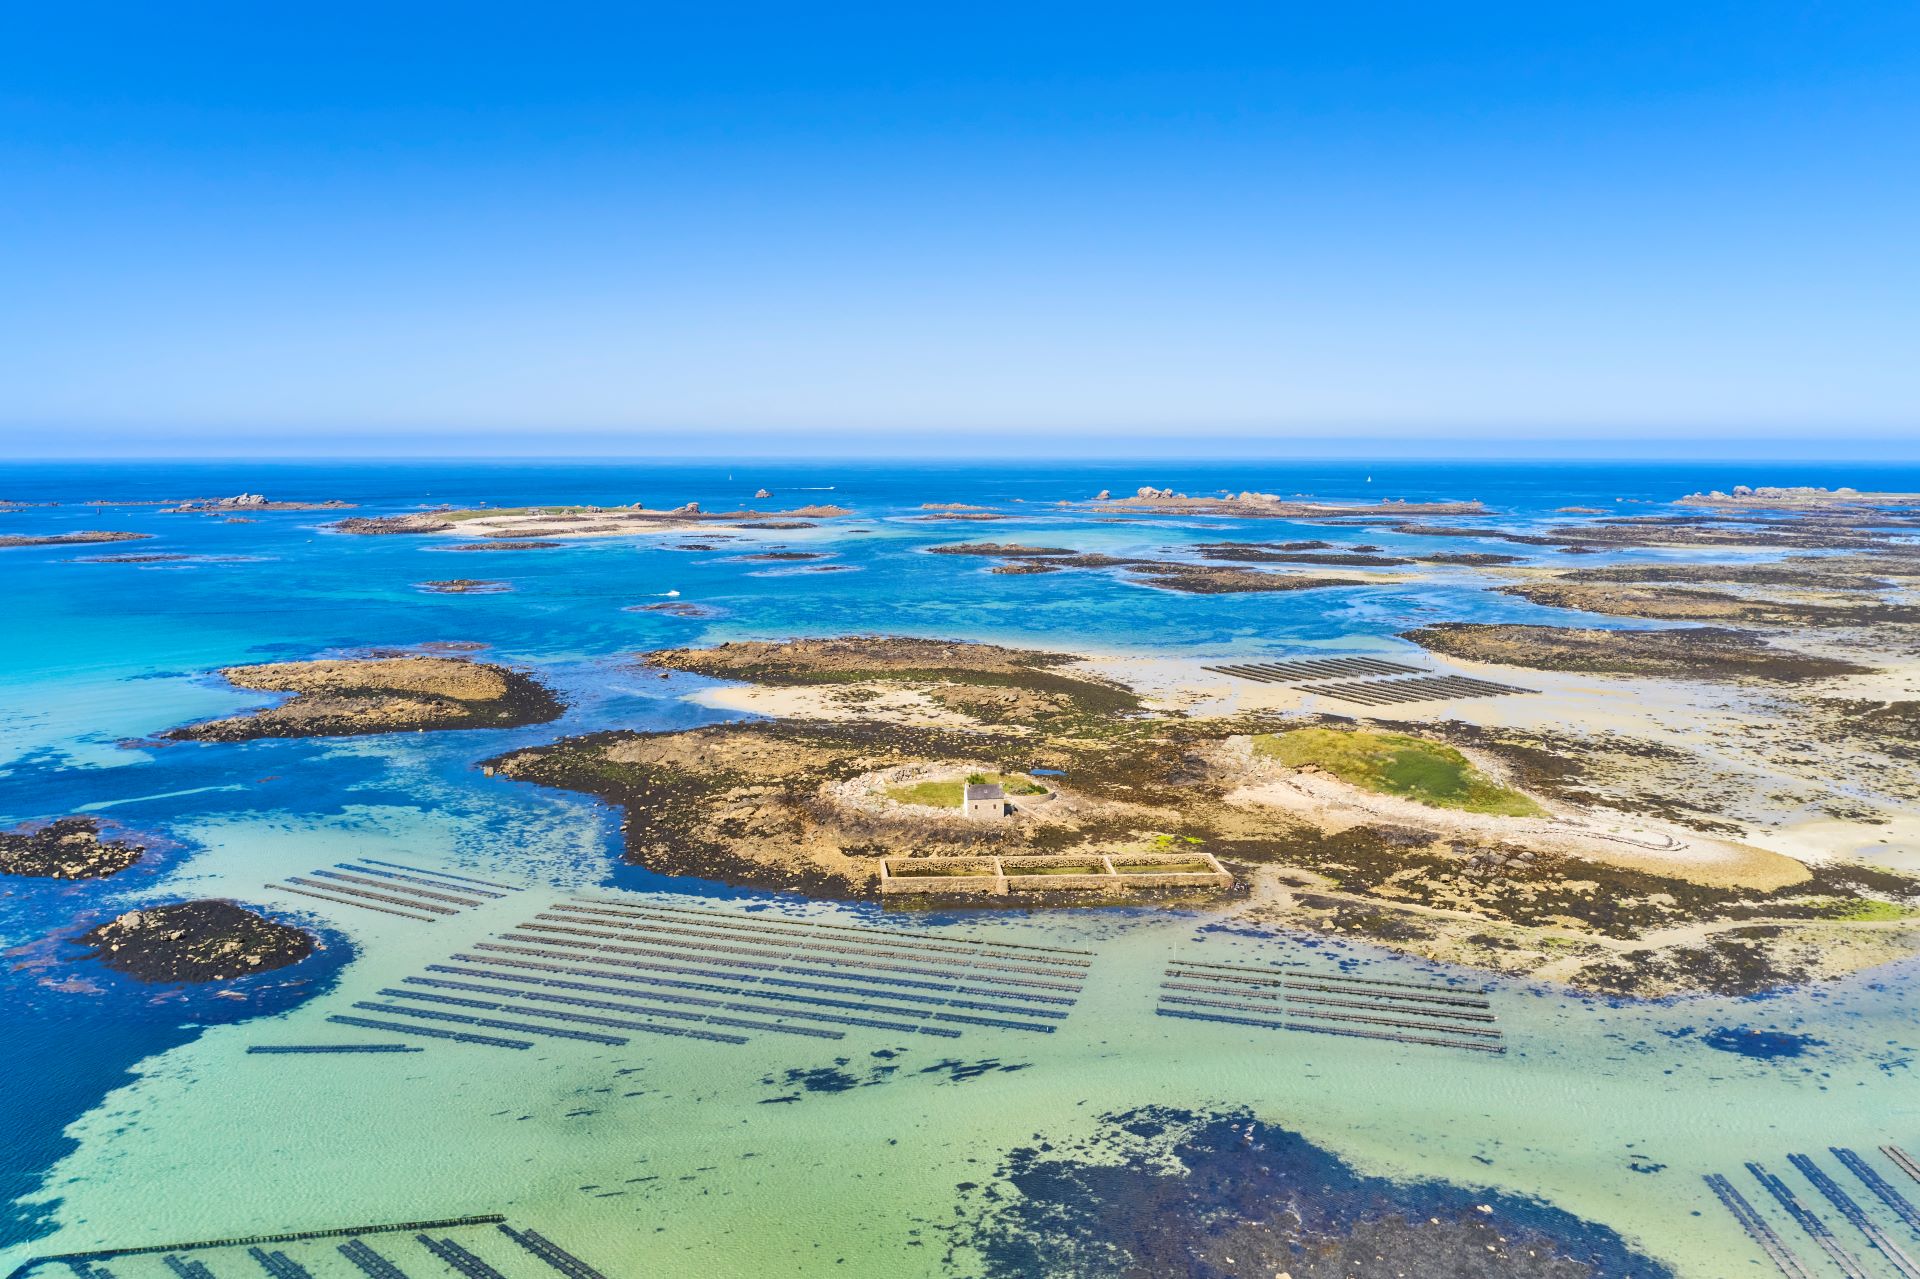 View of the Abers archipelago